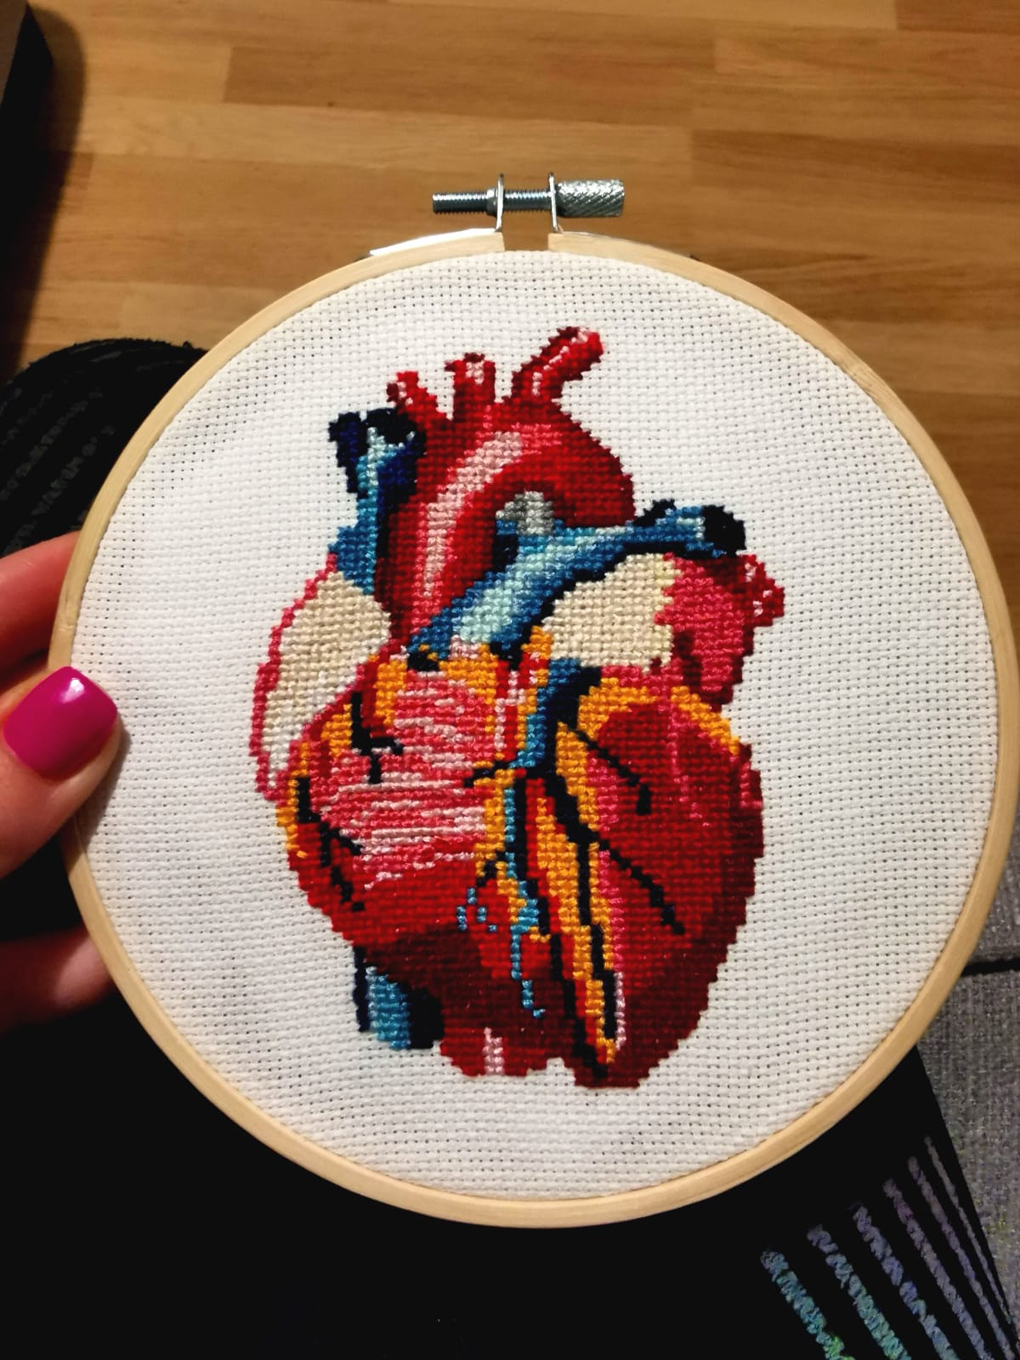 A stitched picture of a heart